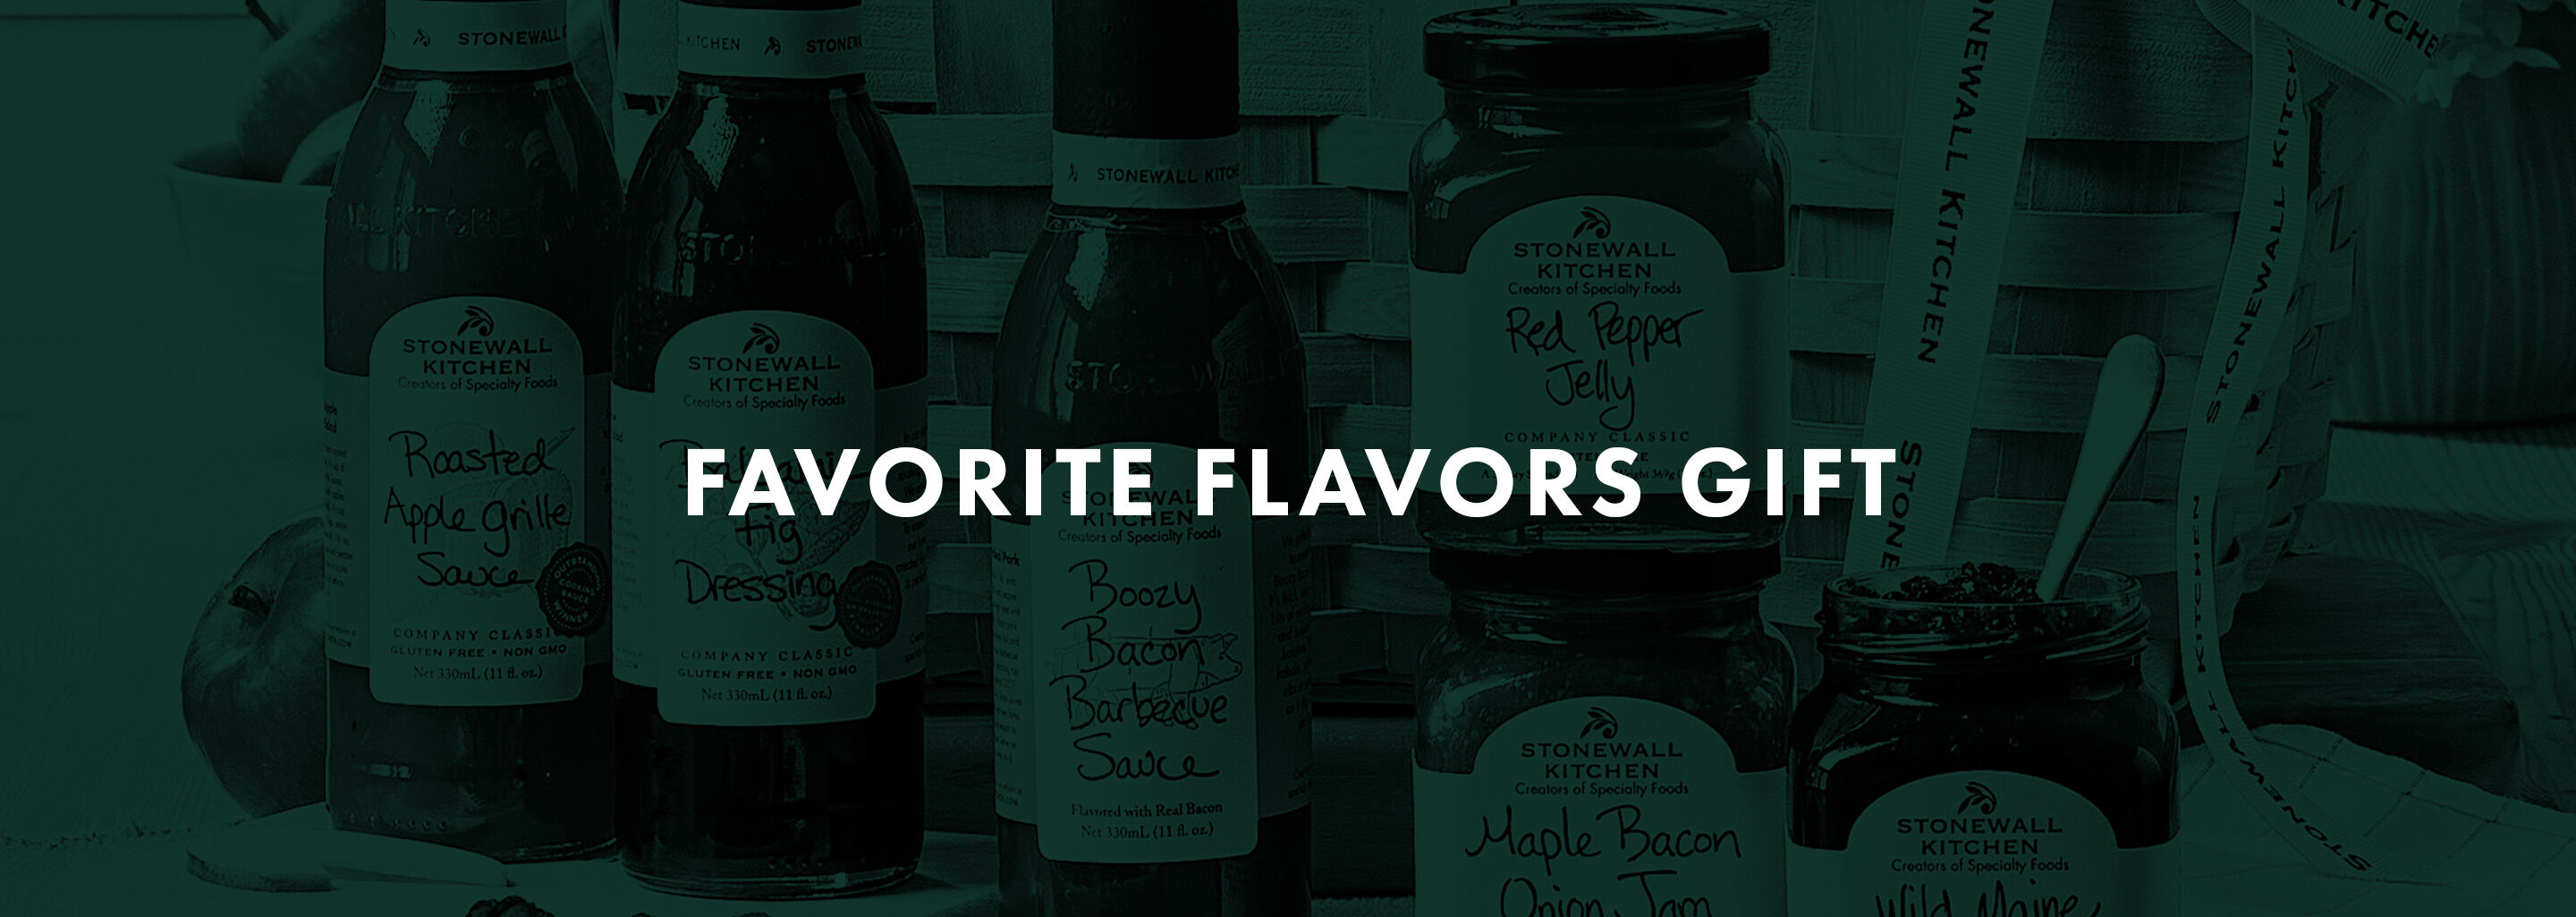 Favorite Flavors Gift by Stonewall Kitchen